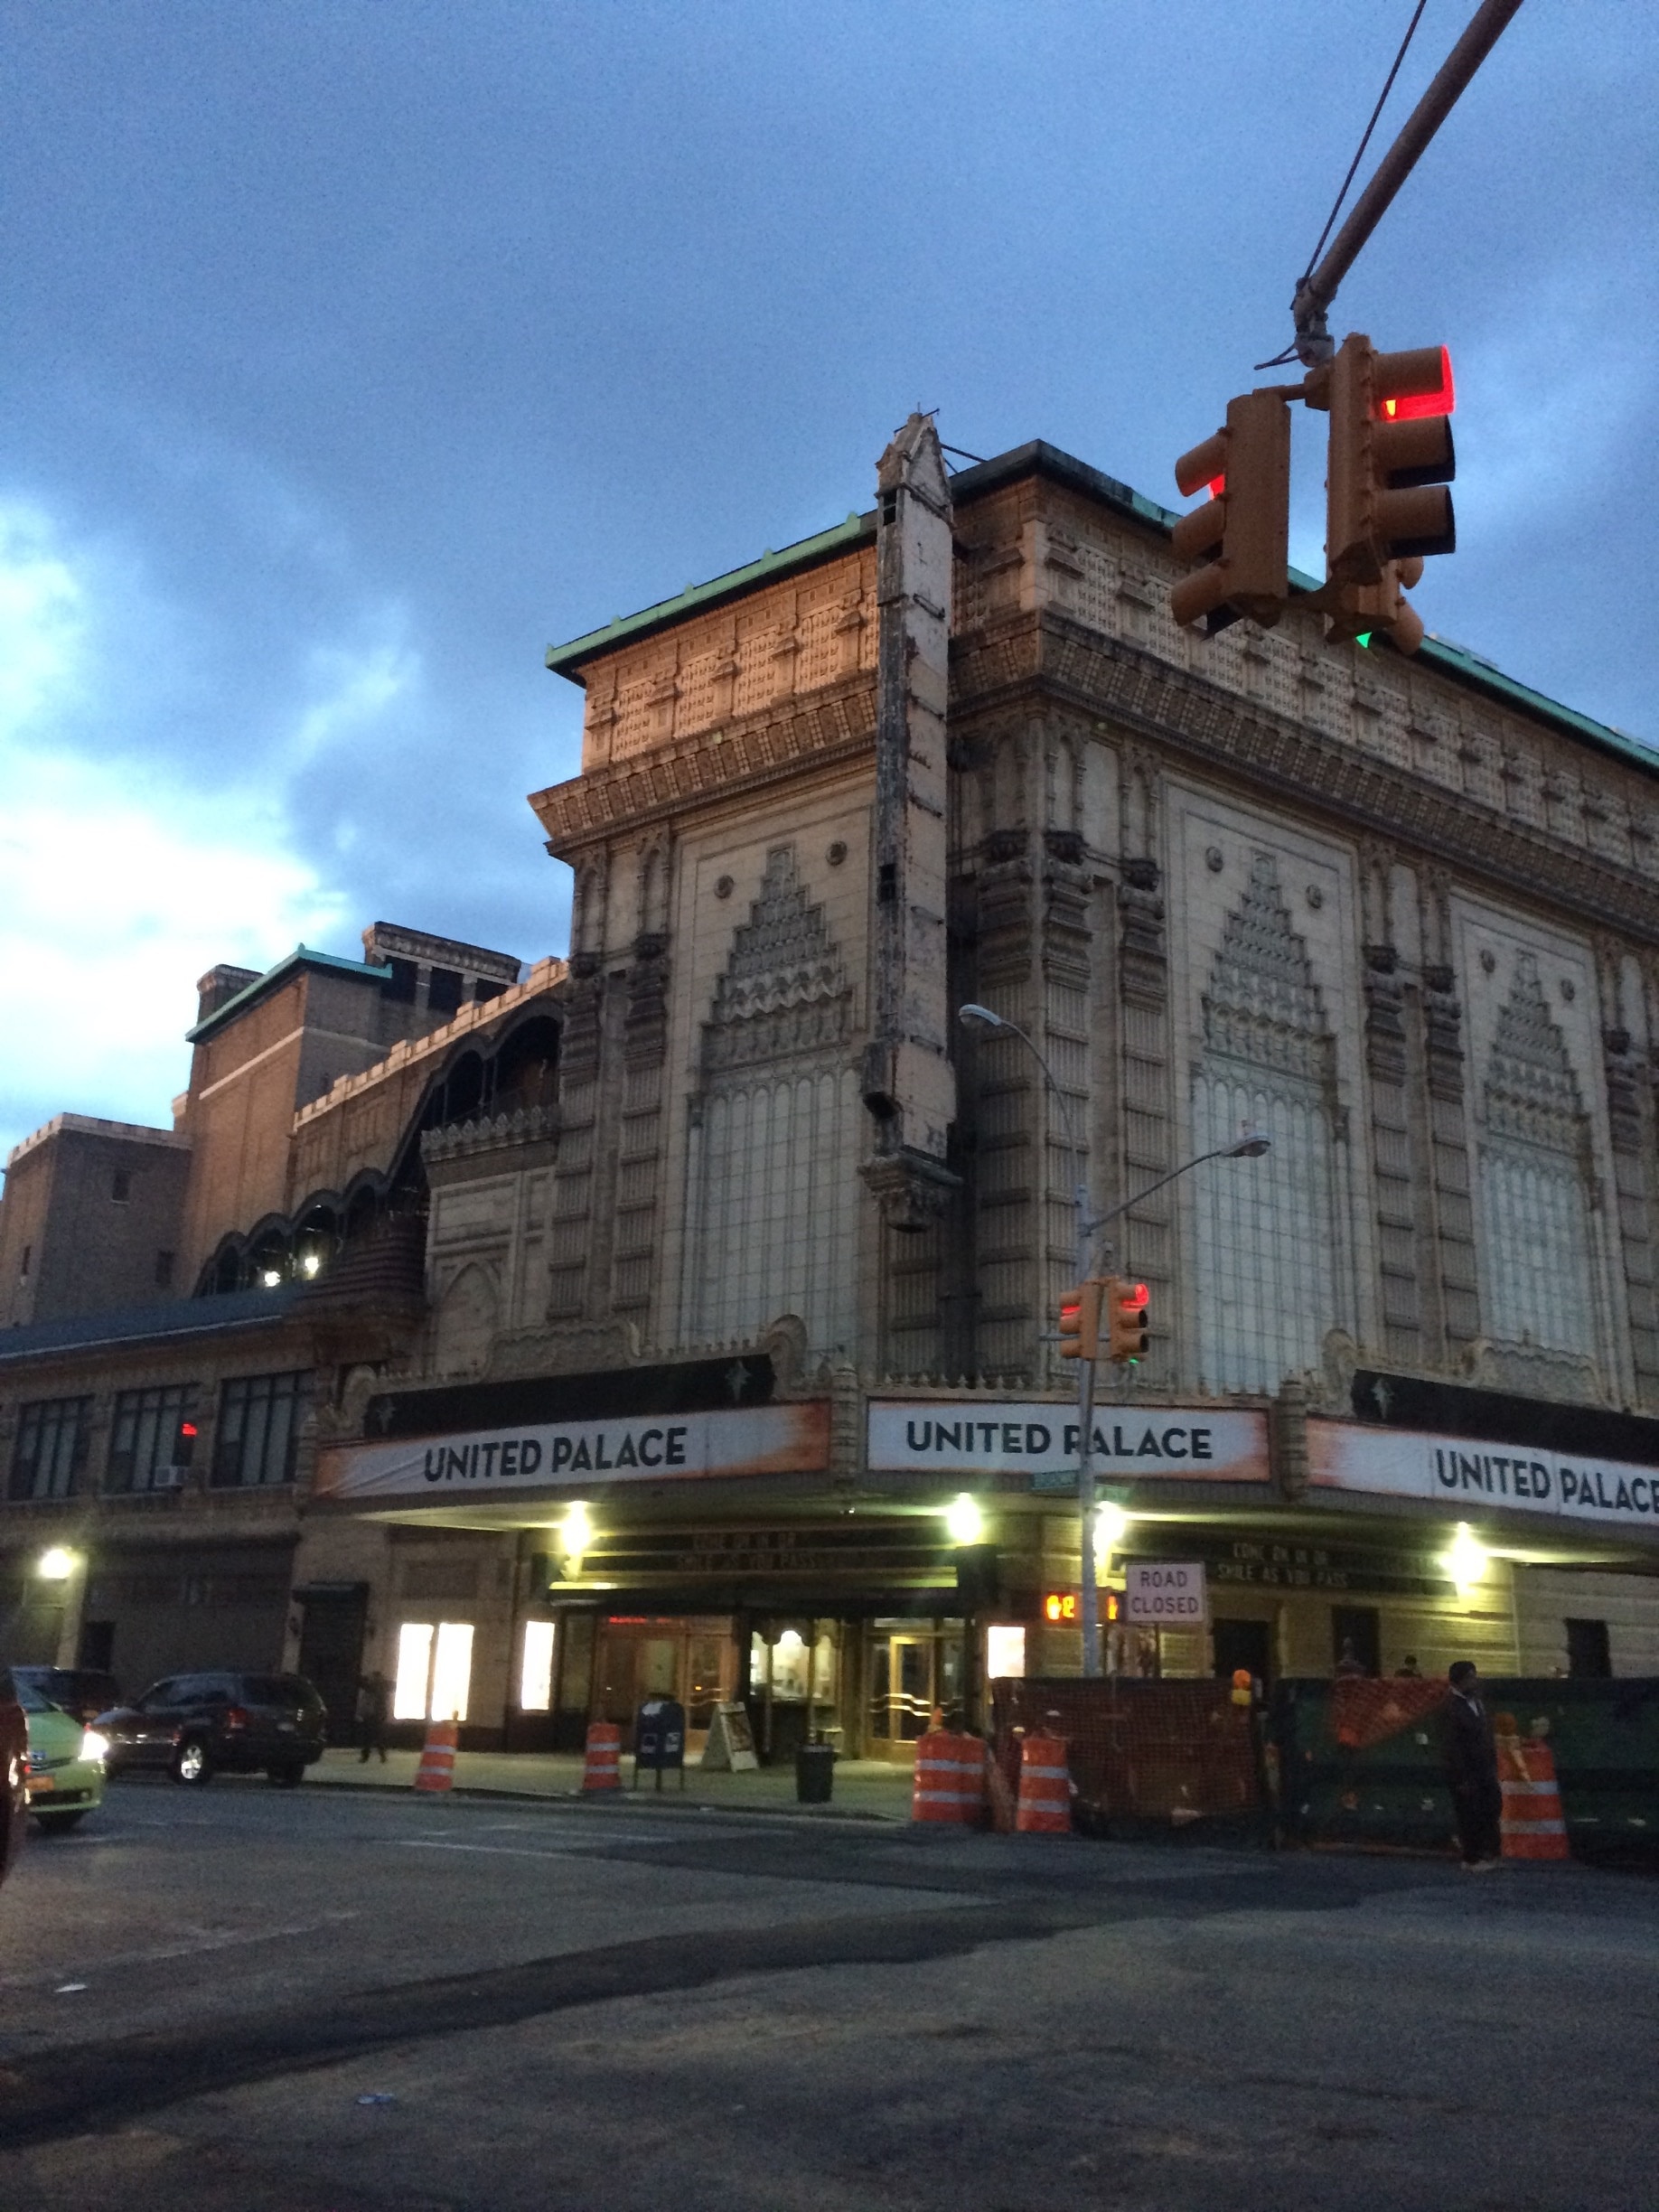 One of the few "Wonder Theaters" left in NYC. These grand movie theaters were built between 1925-1930. This one on Broadway and 175th is the United Palace, now a theatre for the Arts. #goldenhour #DishOurTown #thisisnewyorkcity #unitedpalace #nofilter